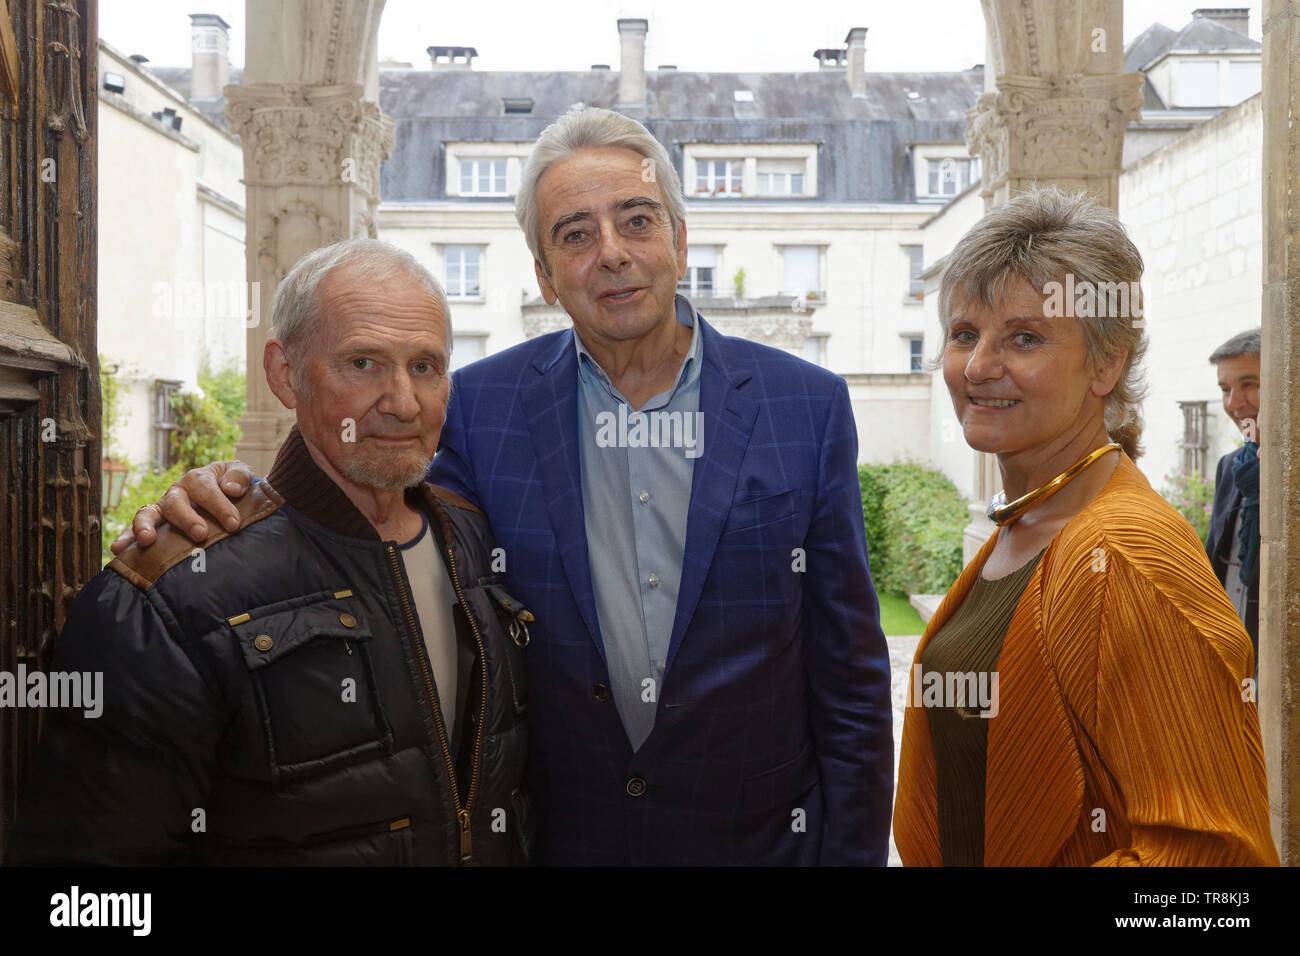 Tours, France.24th May,2019.J. Coville(L),G. Capazza & Sophie attend the Exhibition Re-naissance(s) of the Capazza Gallery in Tours, France Stock Photo